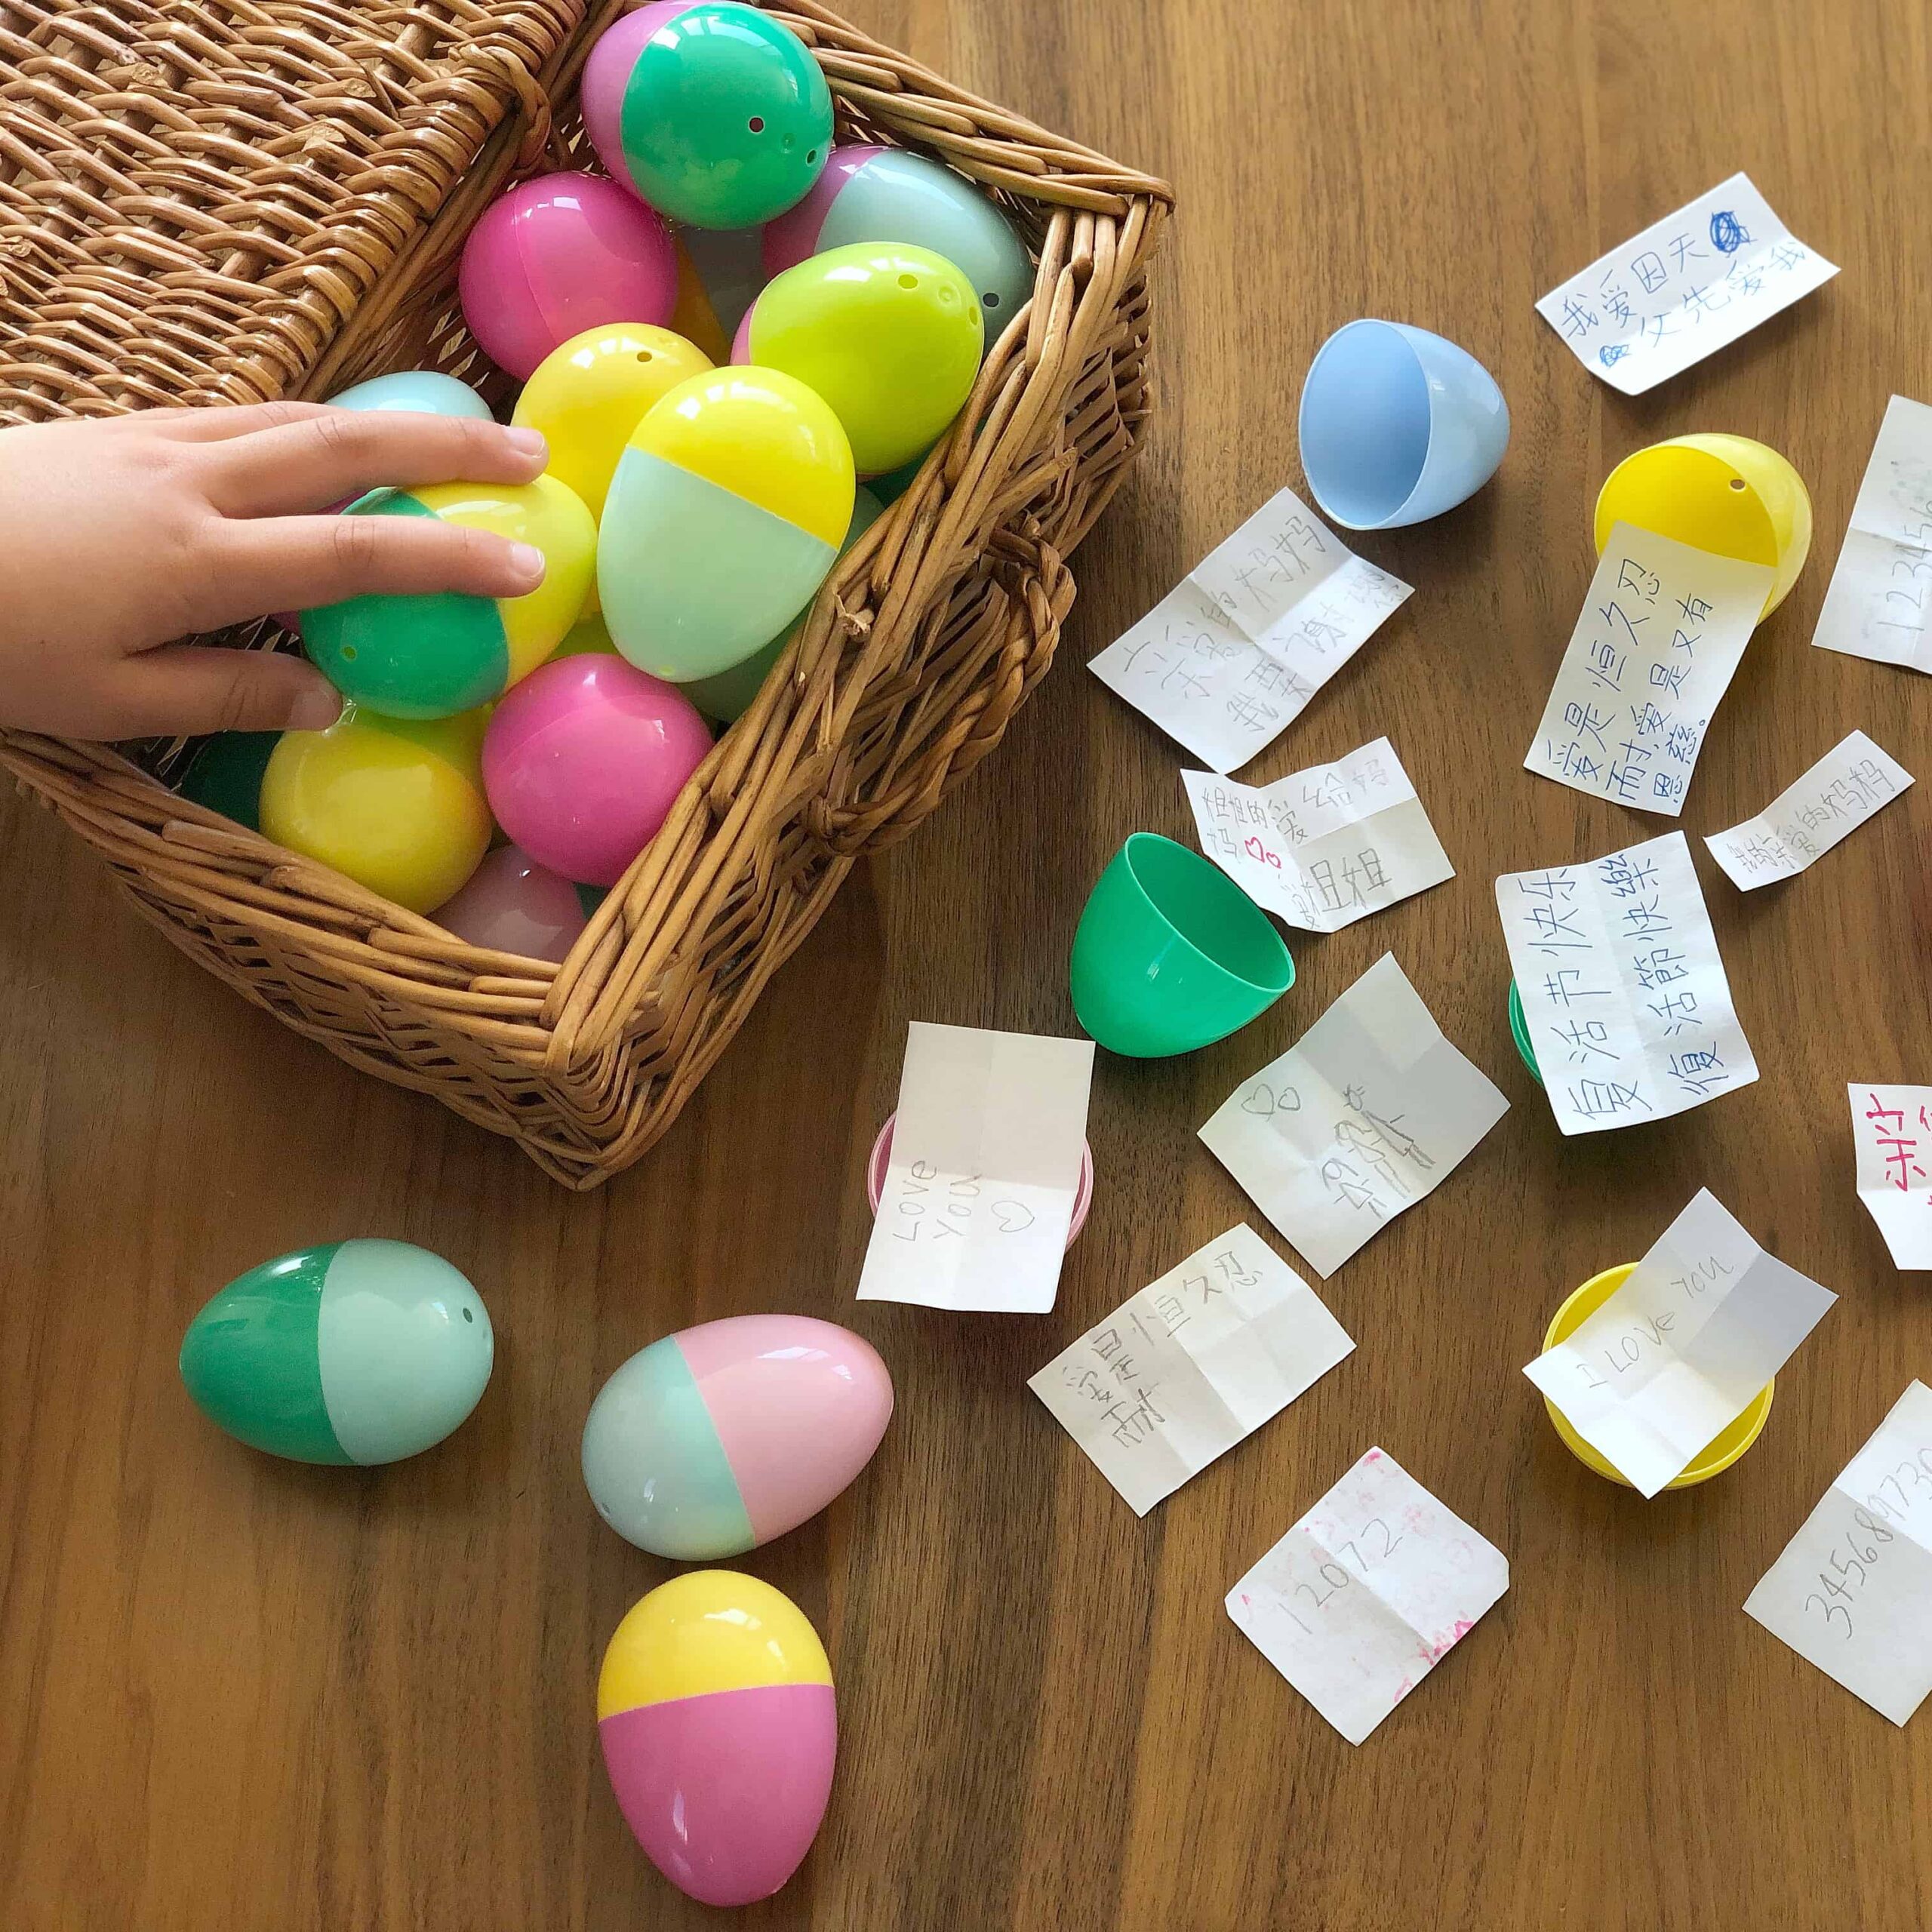 10 Educational Easter Egg Games for Kids to Have Fun Learning